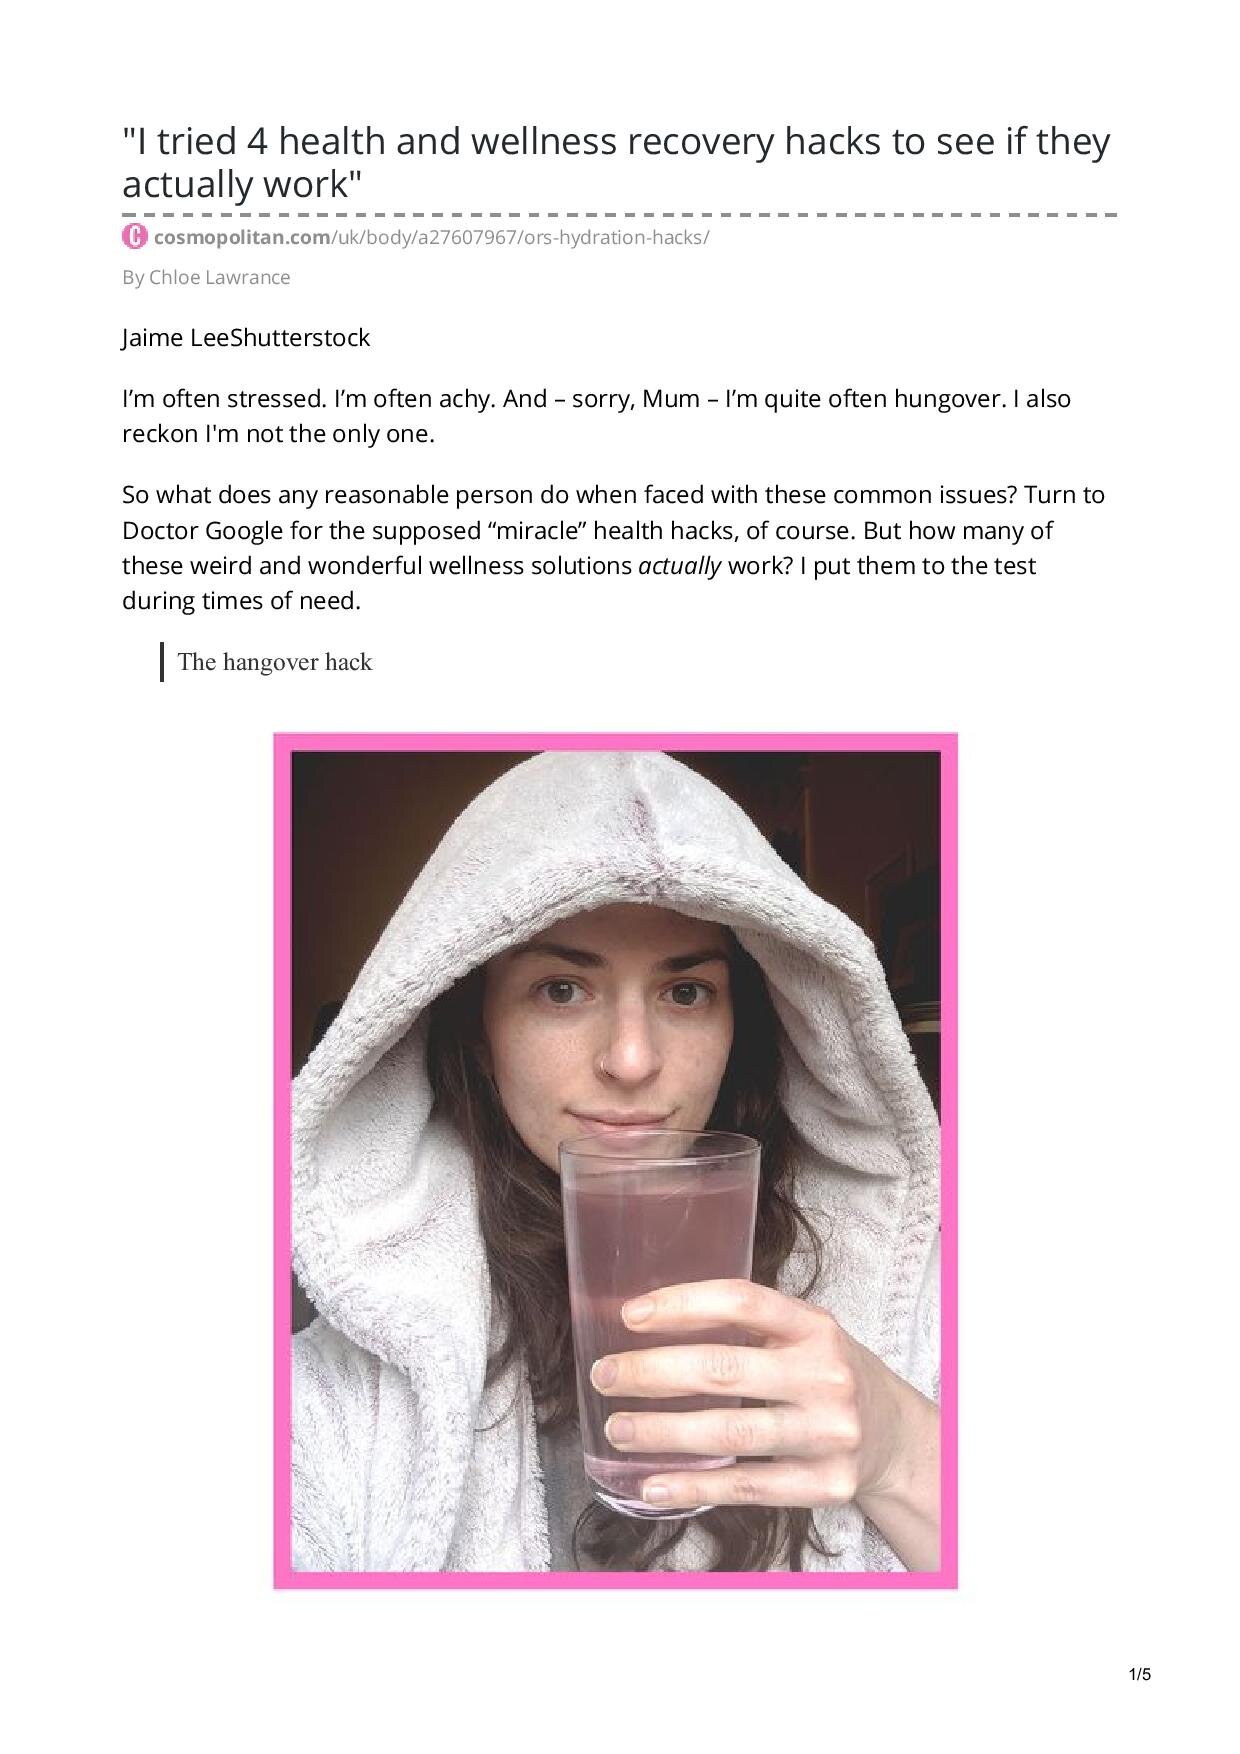 cosmopolitan.com-I tried 4 health and wellness recovery hacks to see if they actually work-page-001.jpg